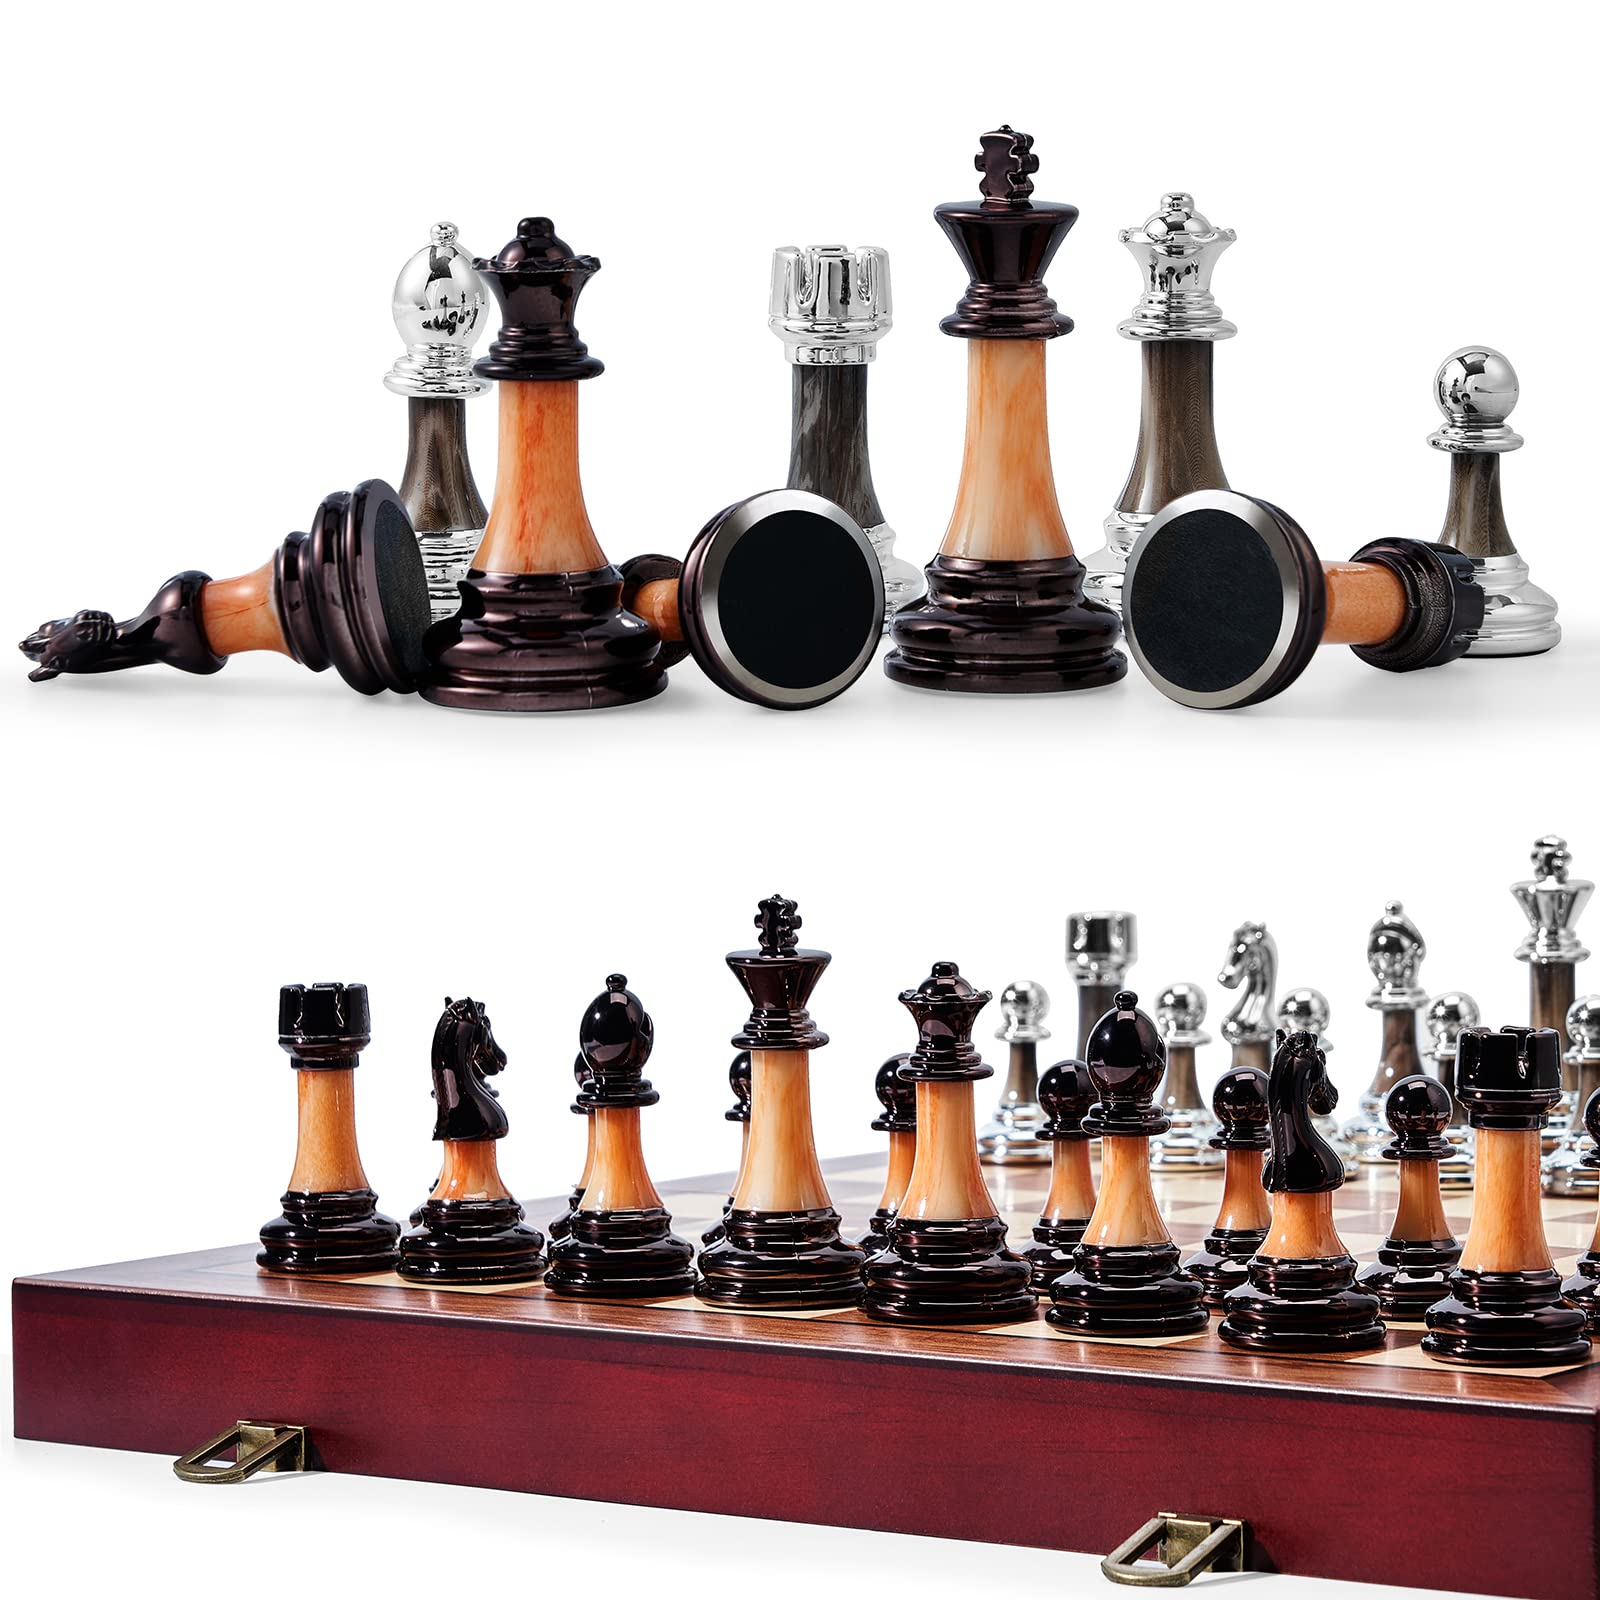 VAMSLOVE Chess Set Large 16''/42cm Folding Wooden Board with Deluxe Weighted Acrylic Chess Pieces - 3.5